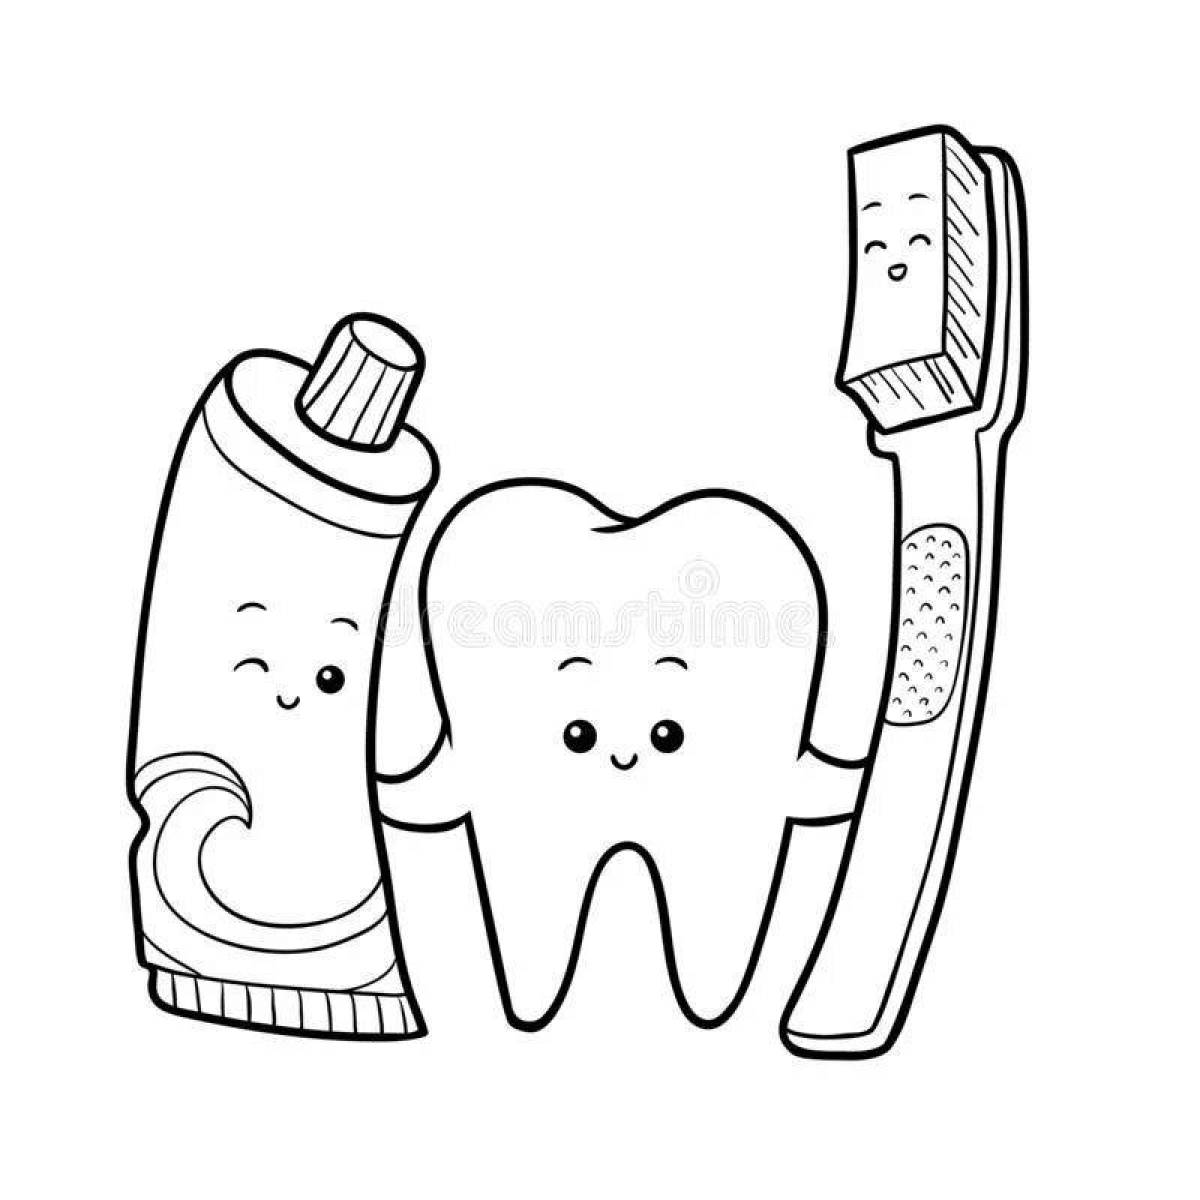 Luminous toothbrush and toothpaste coloring page